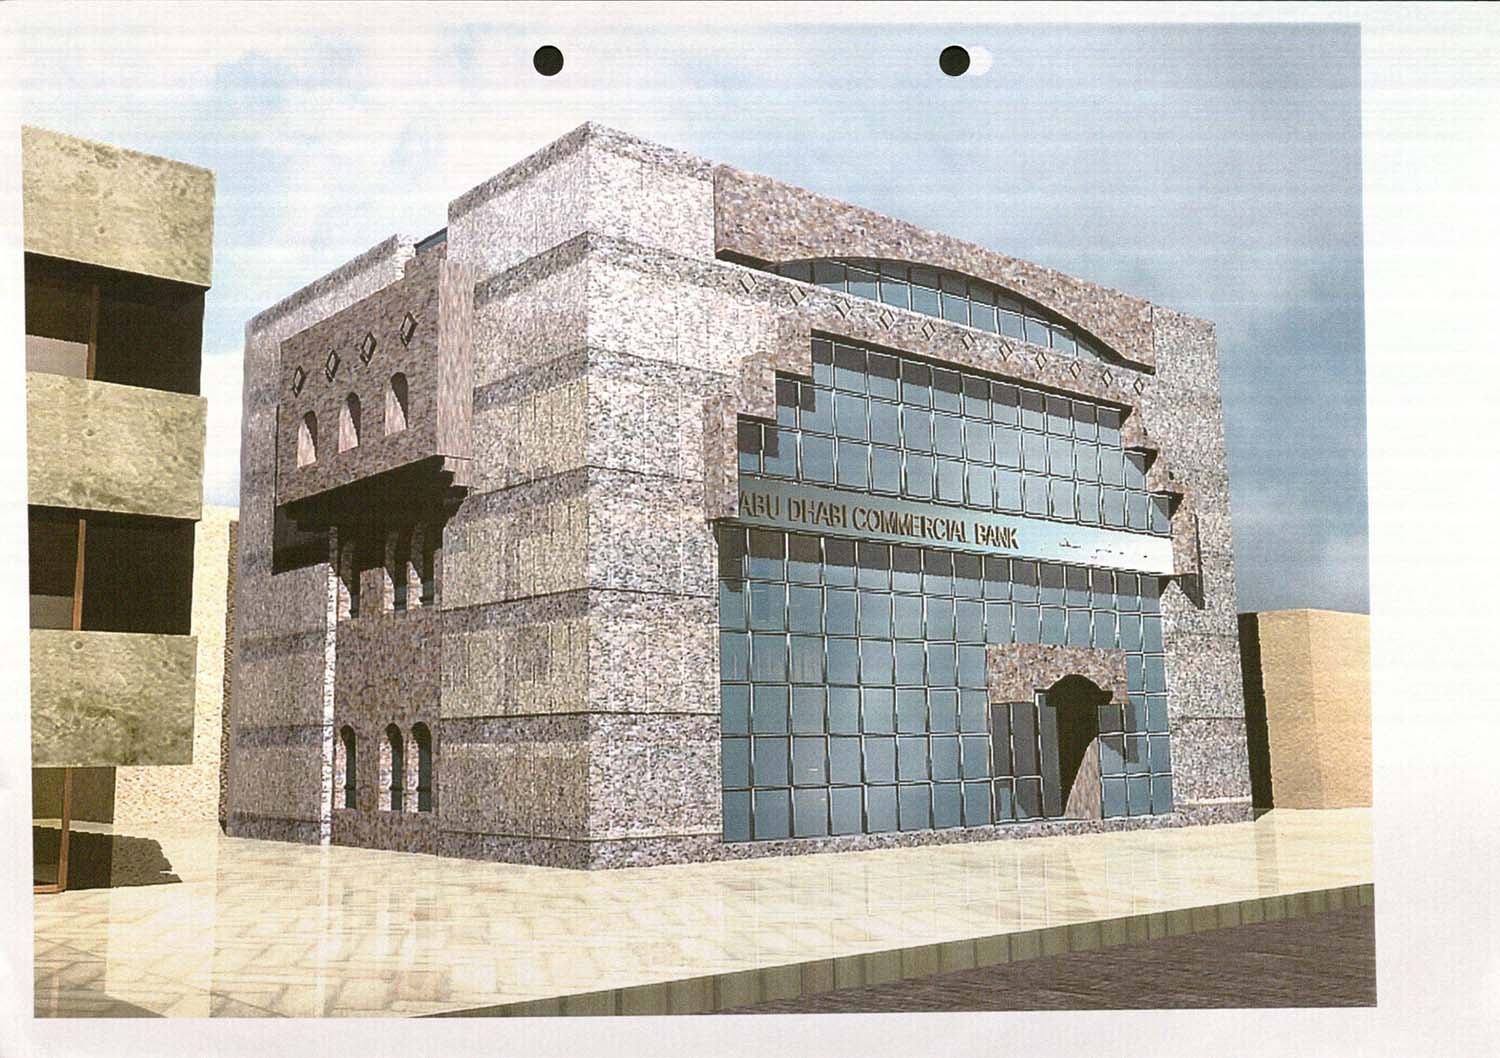 Architectural rendering of the bank's facade.